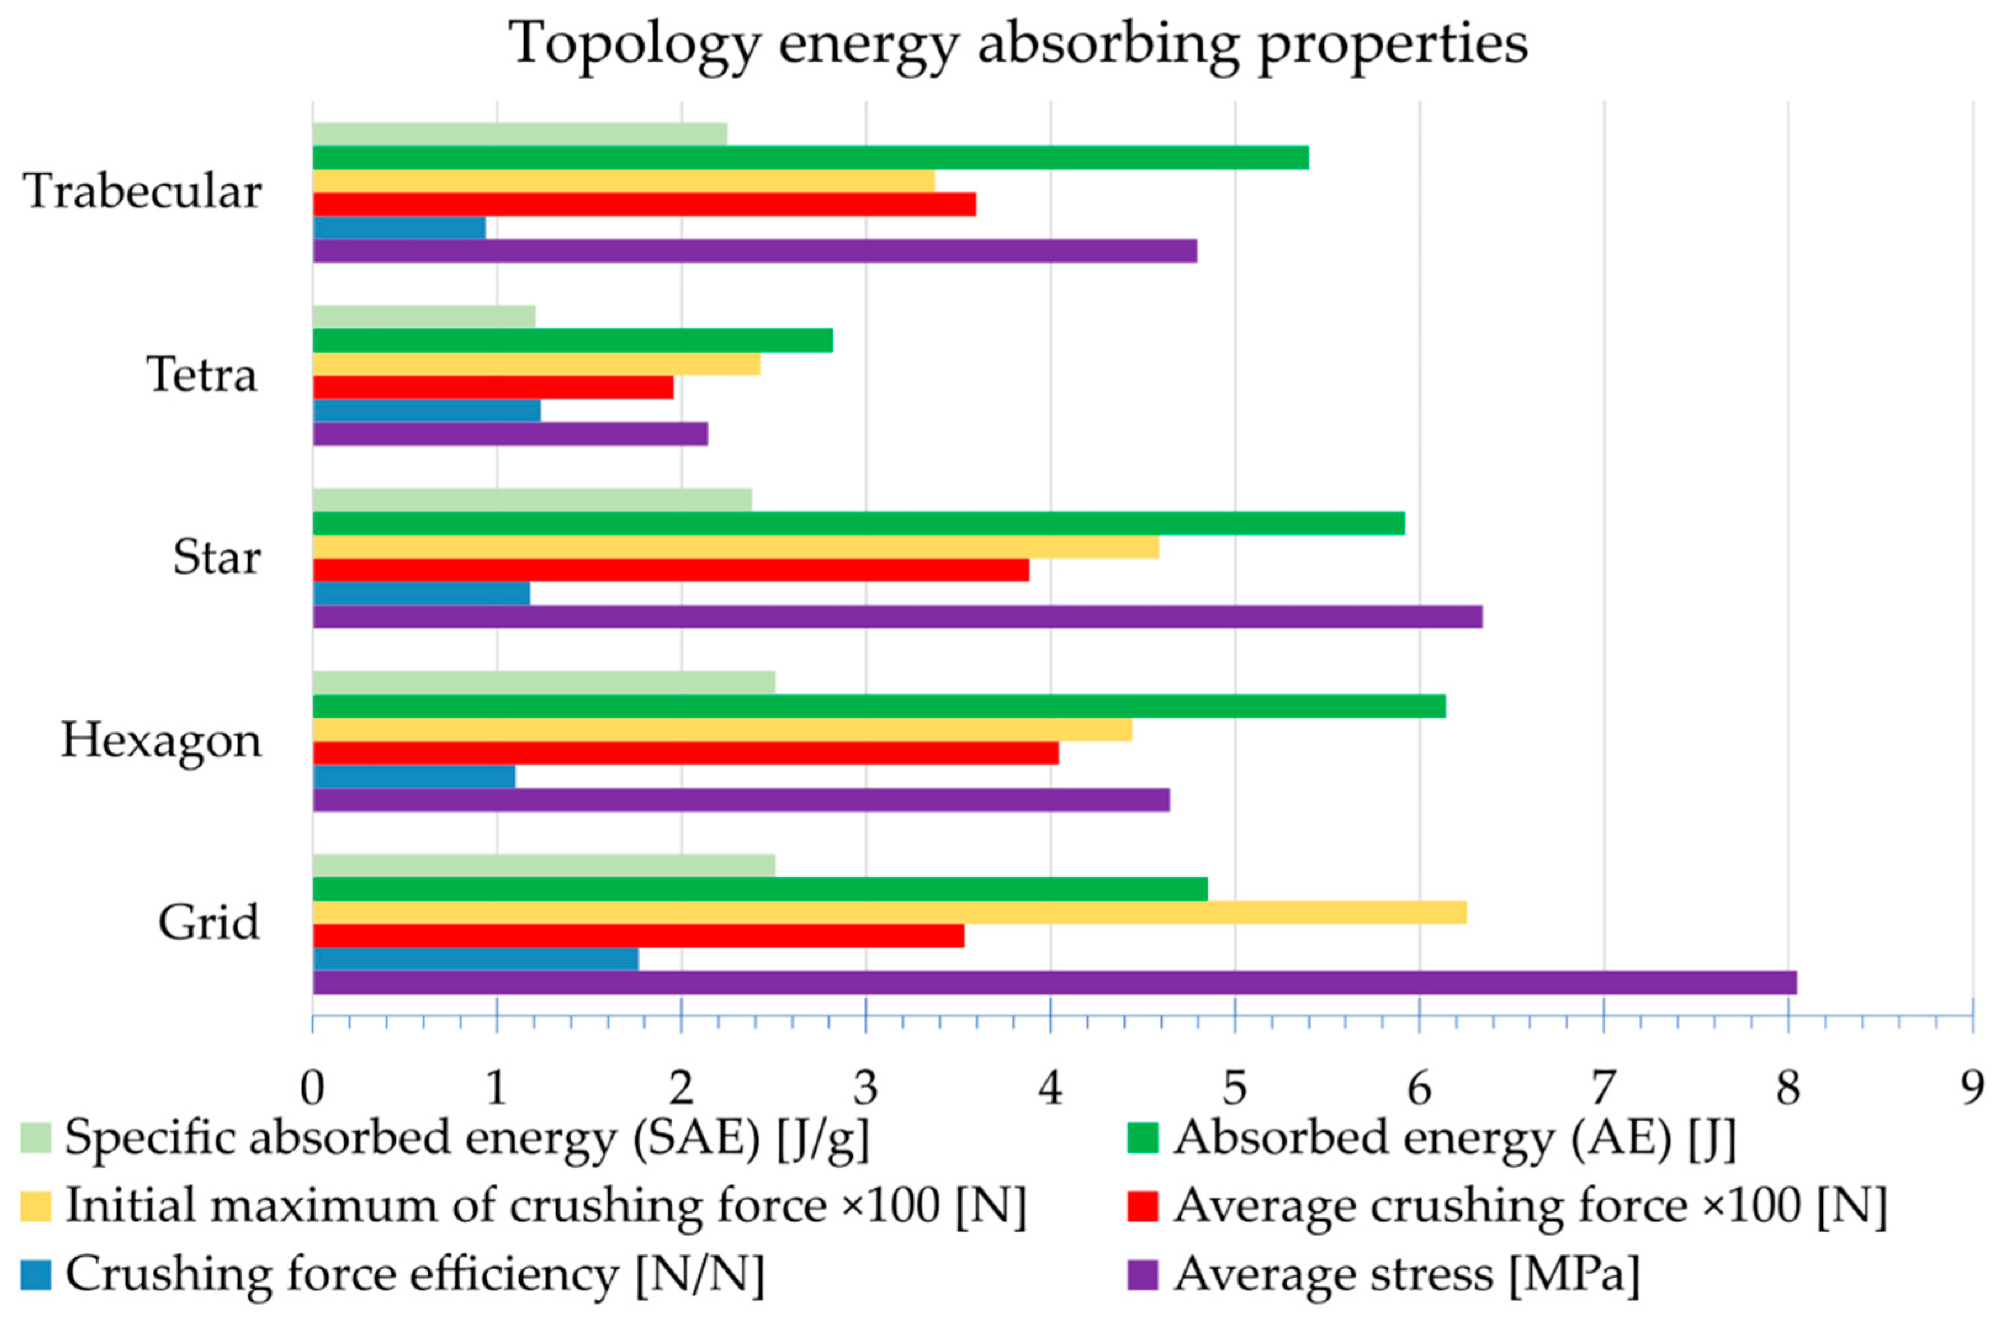 Graphical comparison of the energy absorbing parameters of the topologies studied.